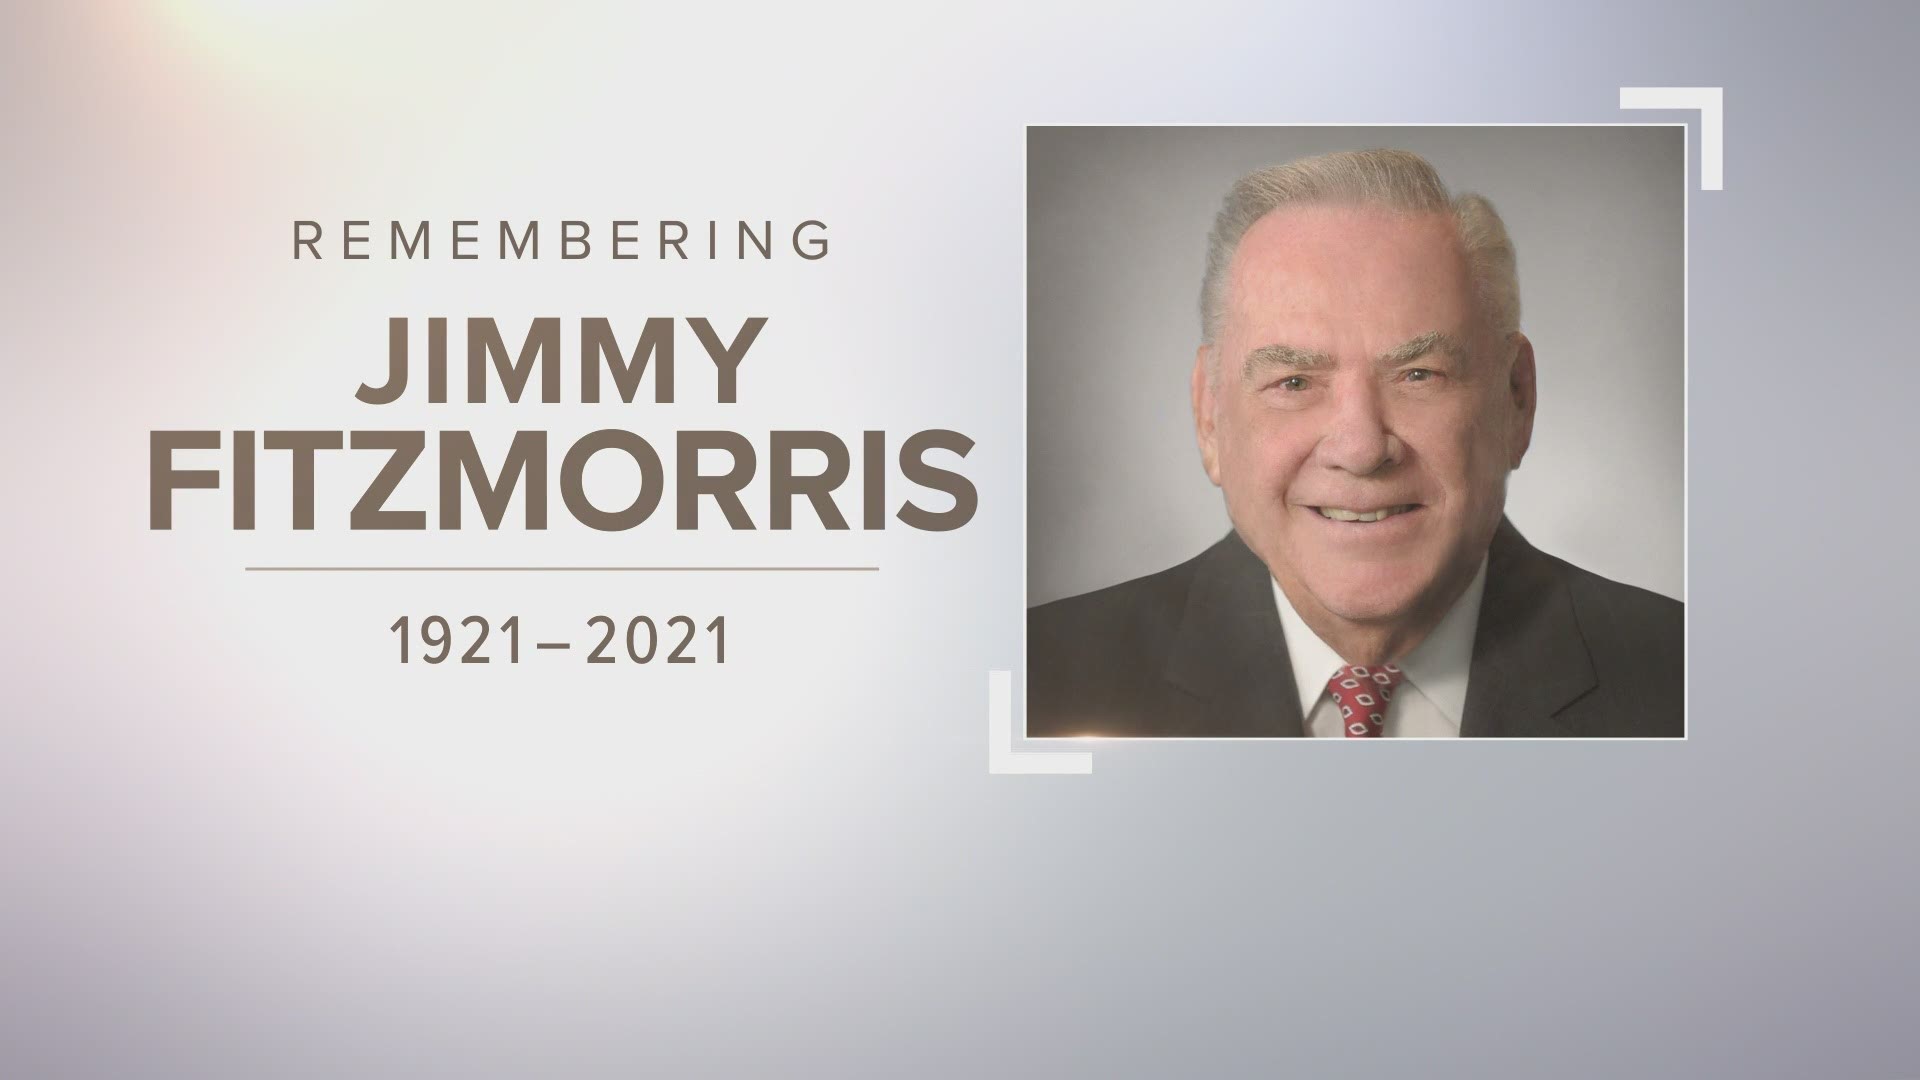 Family, friends and elected officials from past and present gathered Wednesday to send off Jimmy Fitzmorris with modest fanfare.